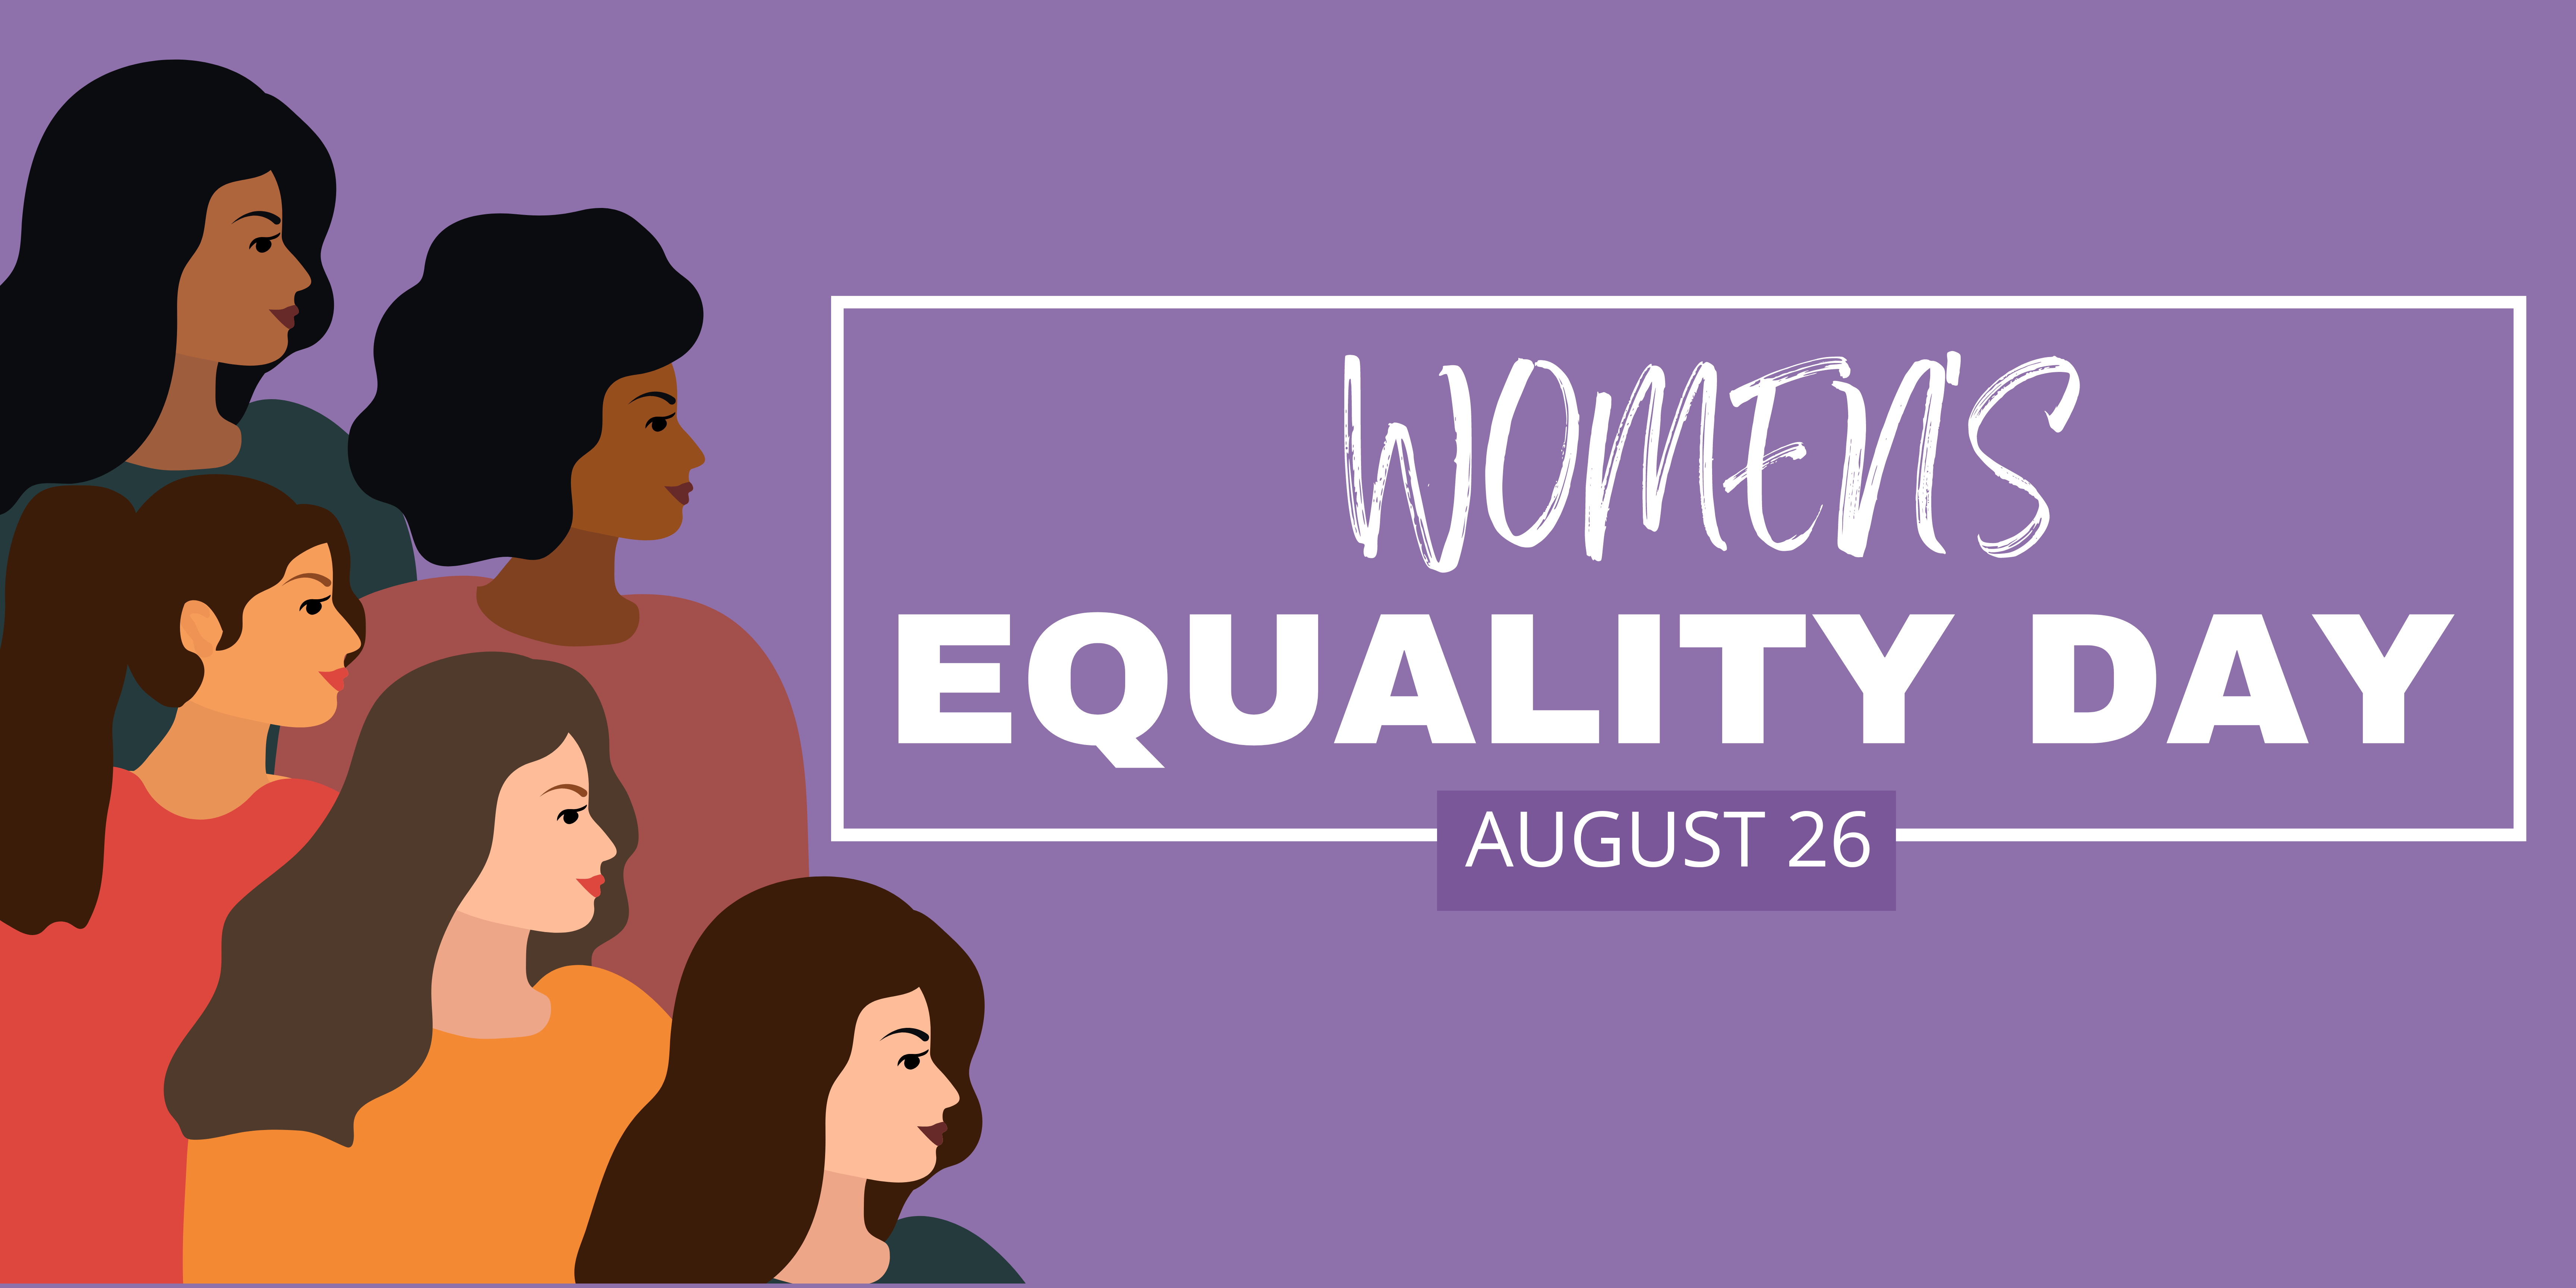 Women's Equality Day August 26, 2022